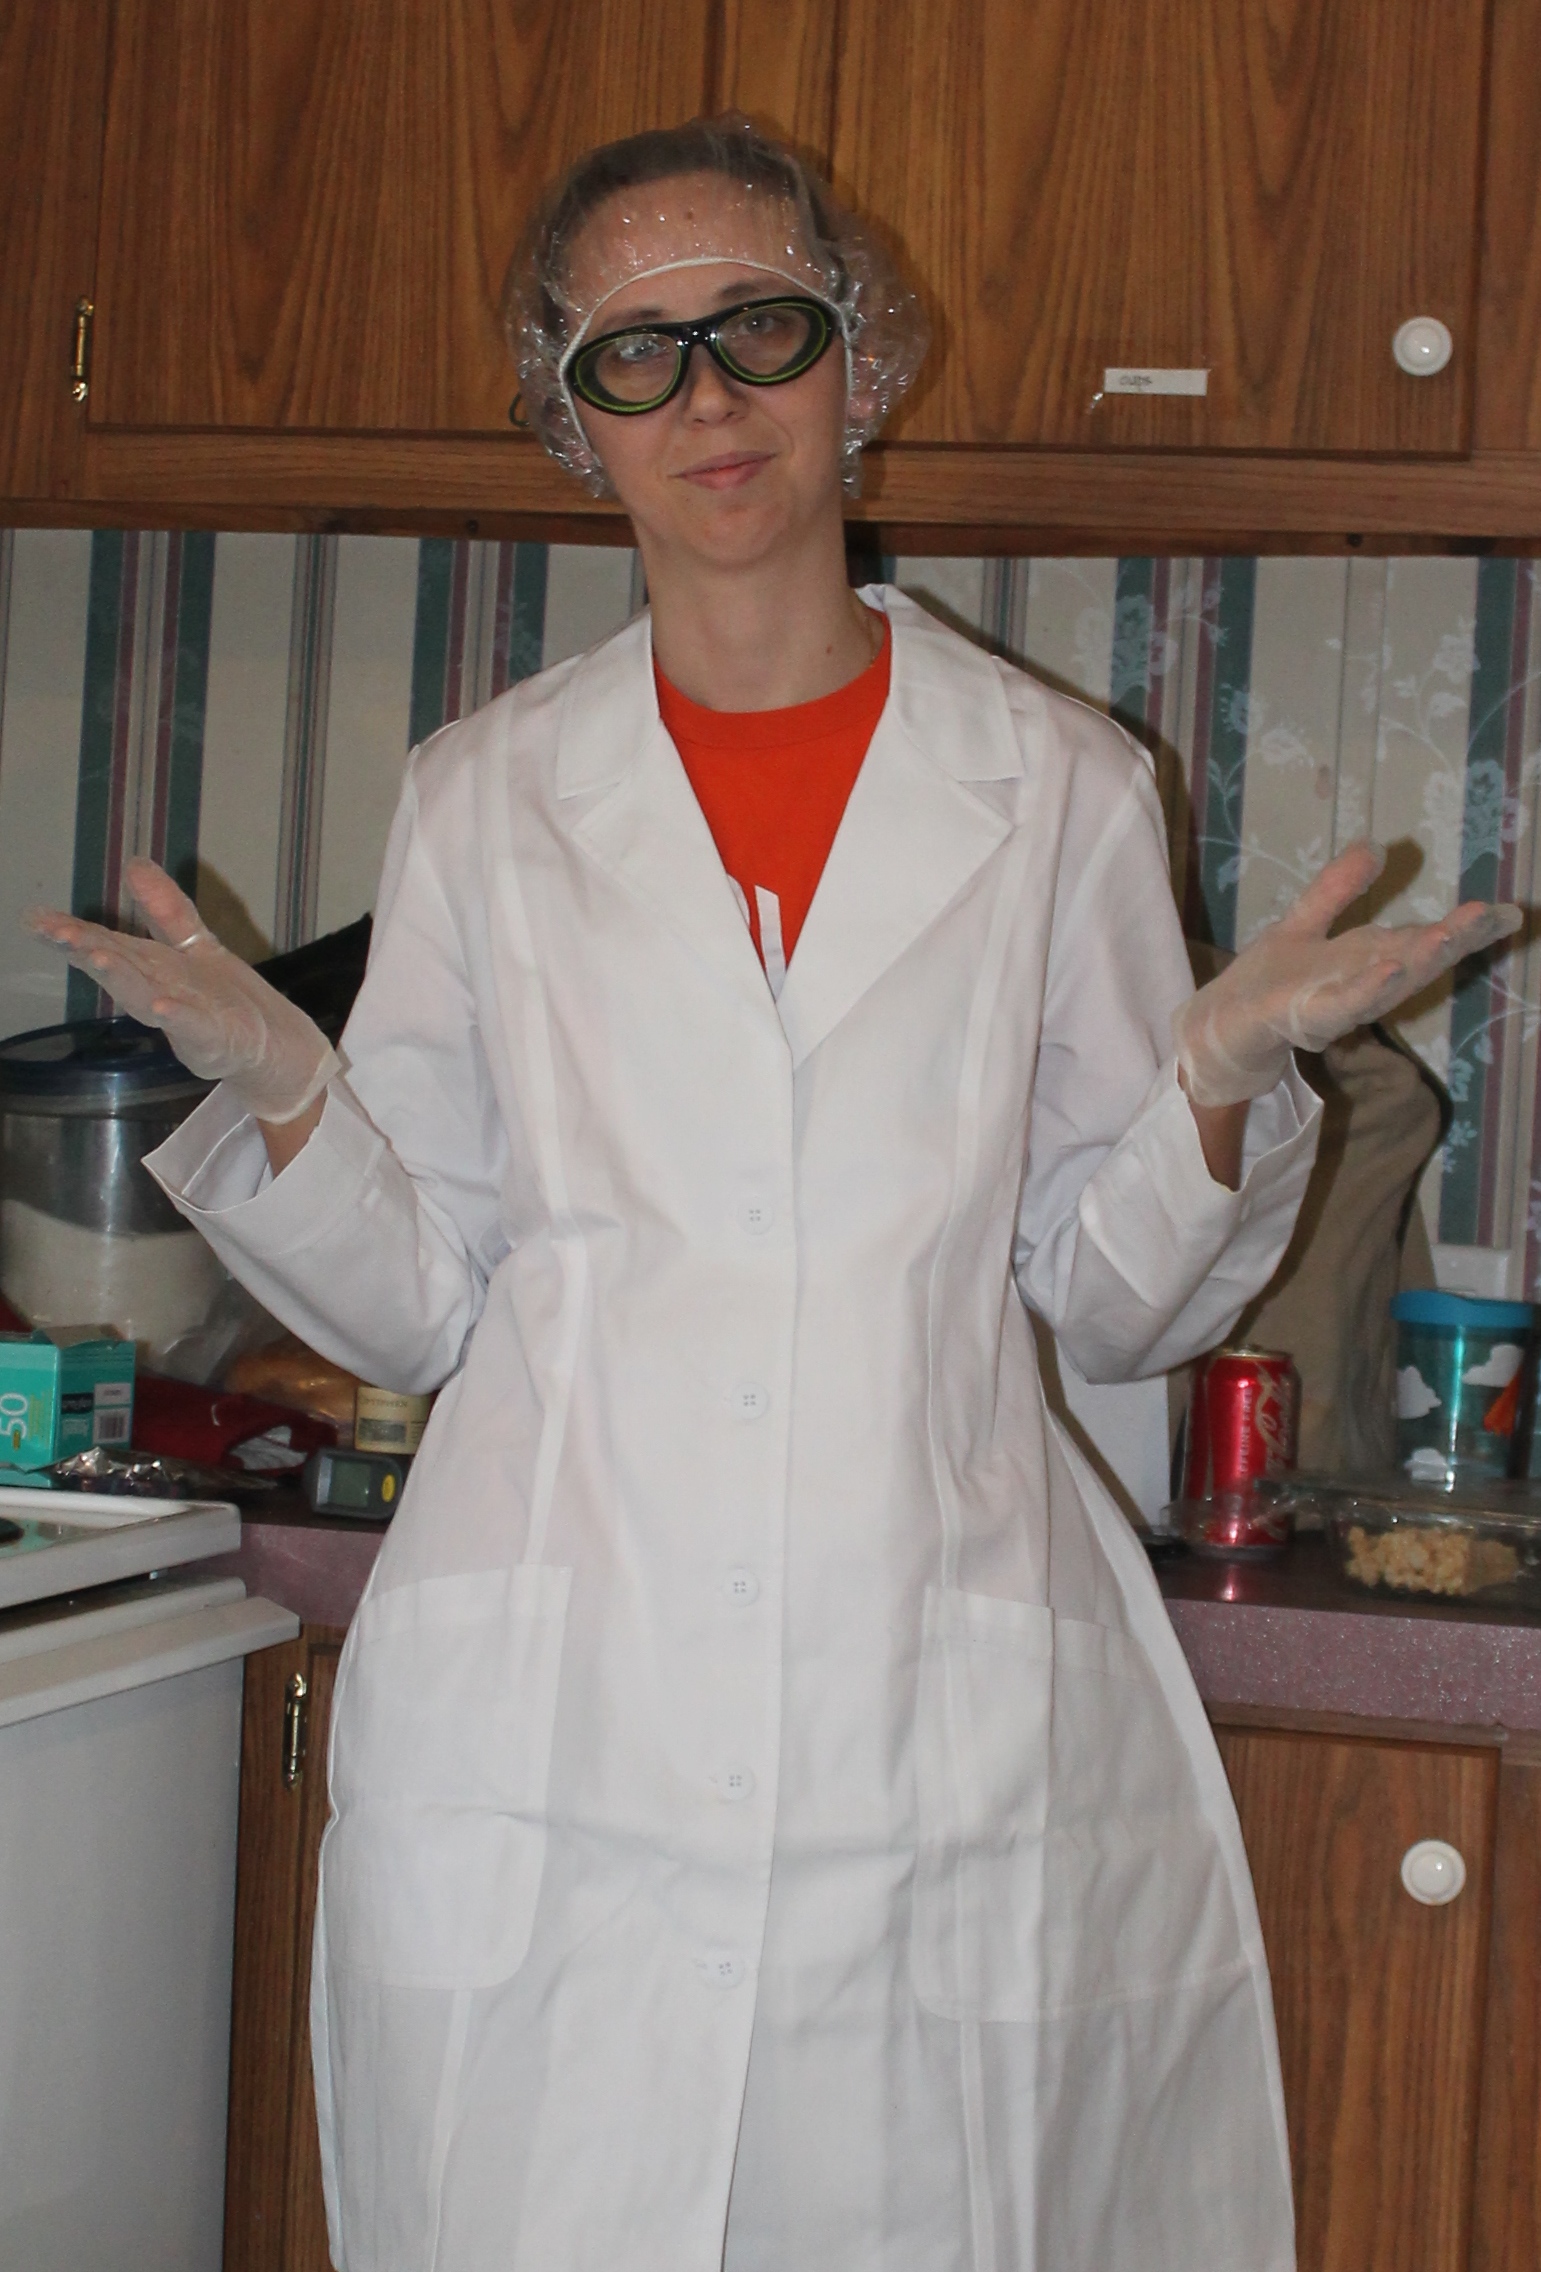 Me in my lab coat and science stuff